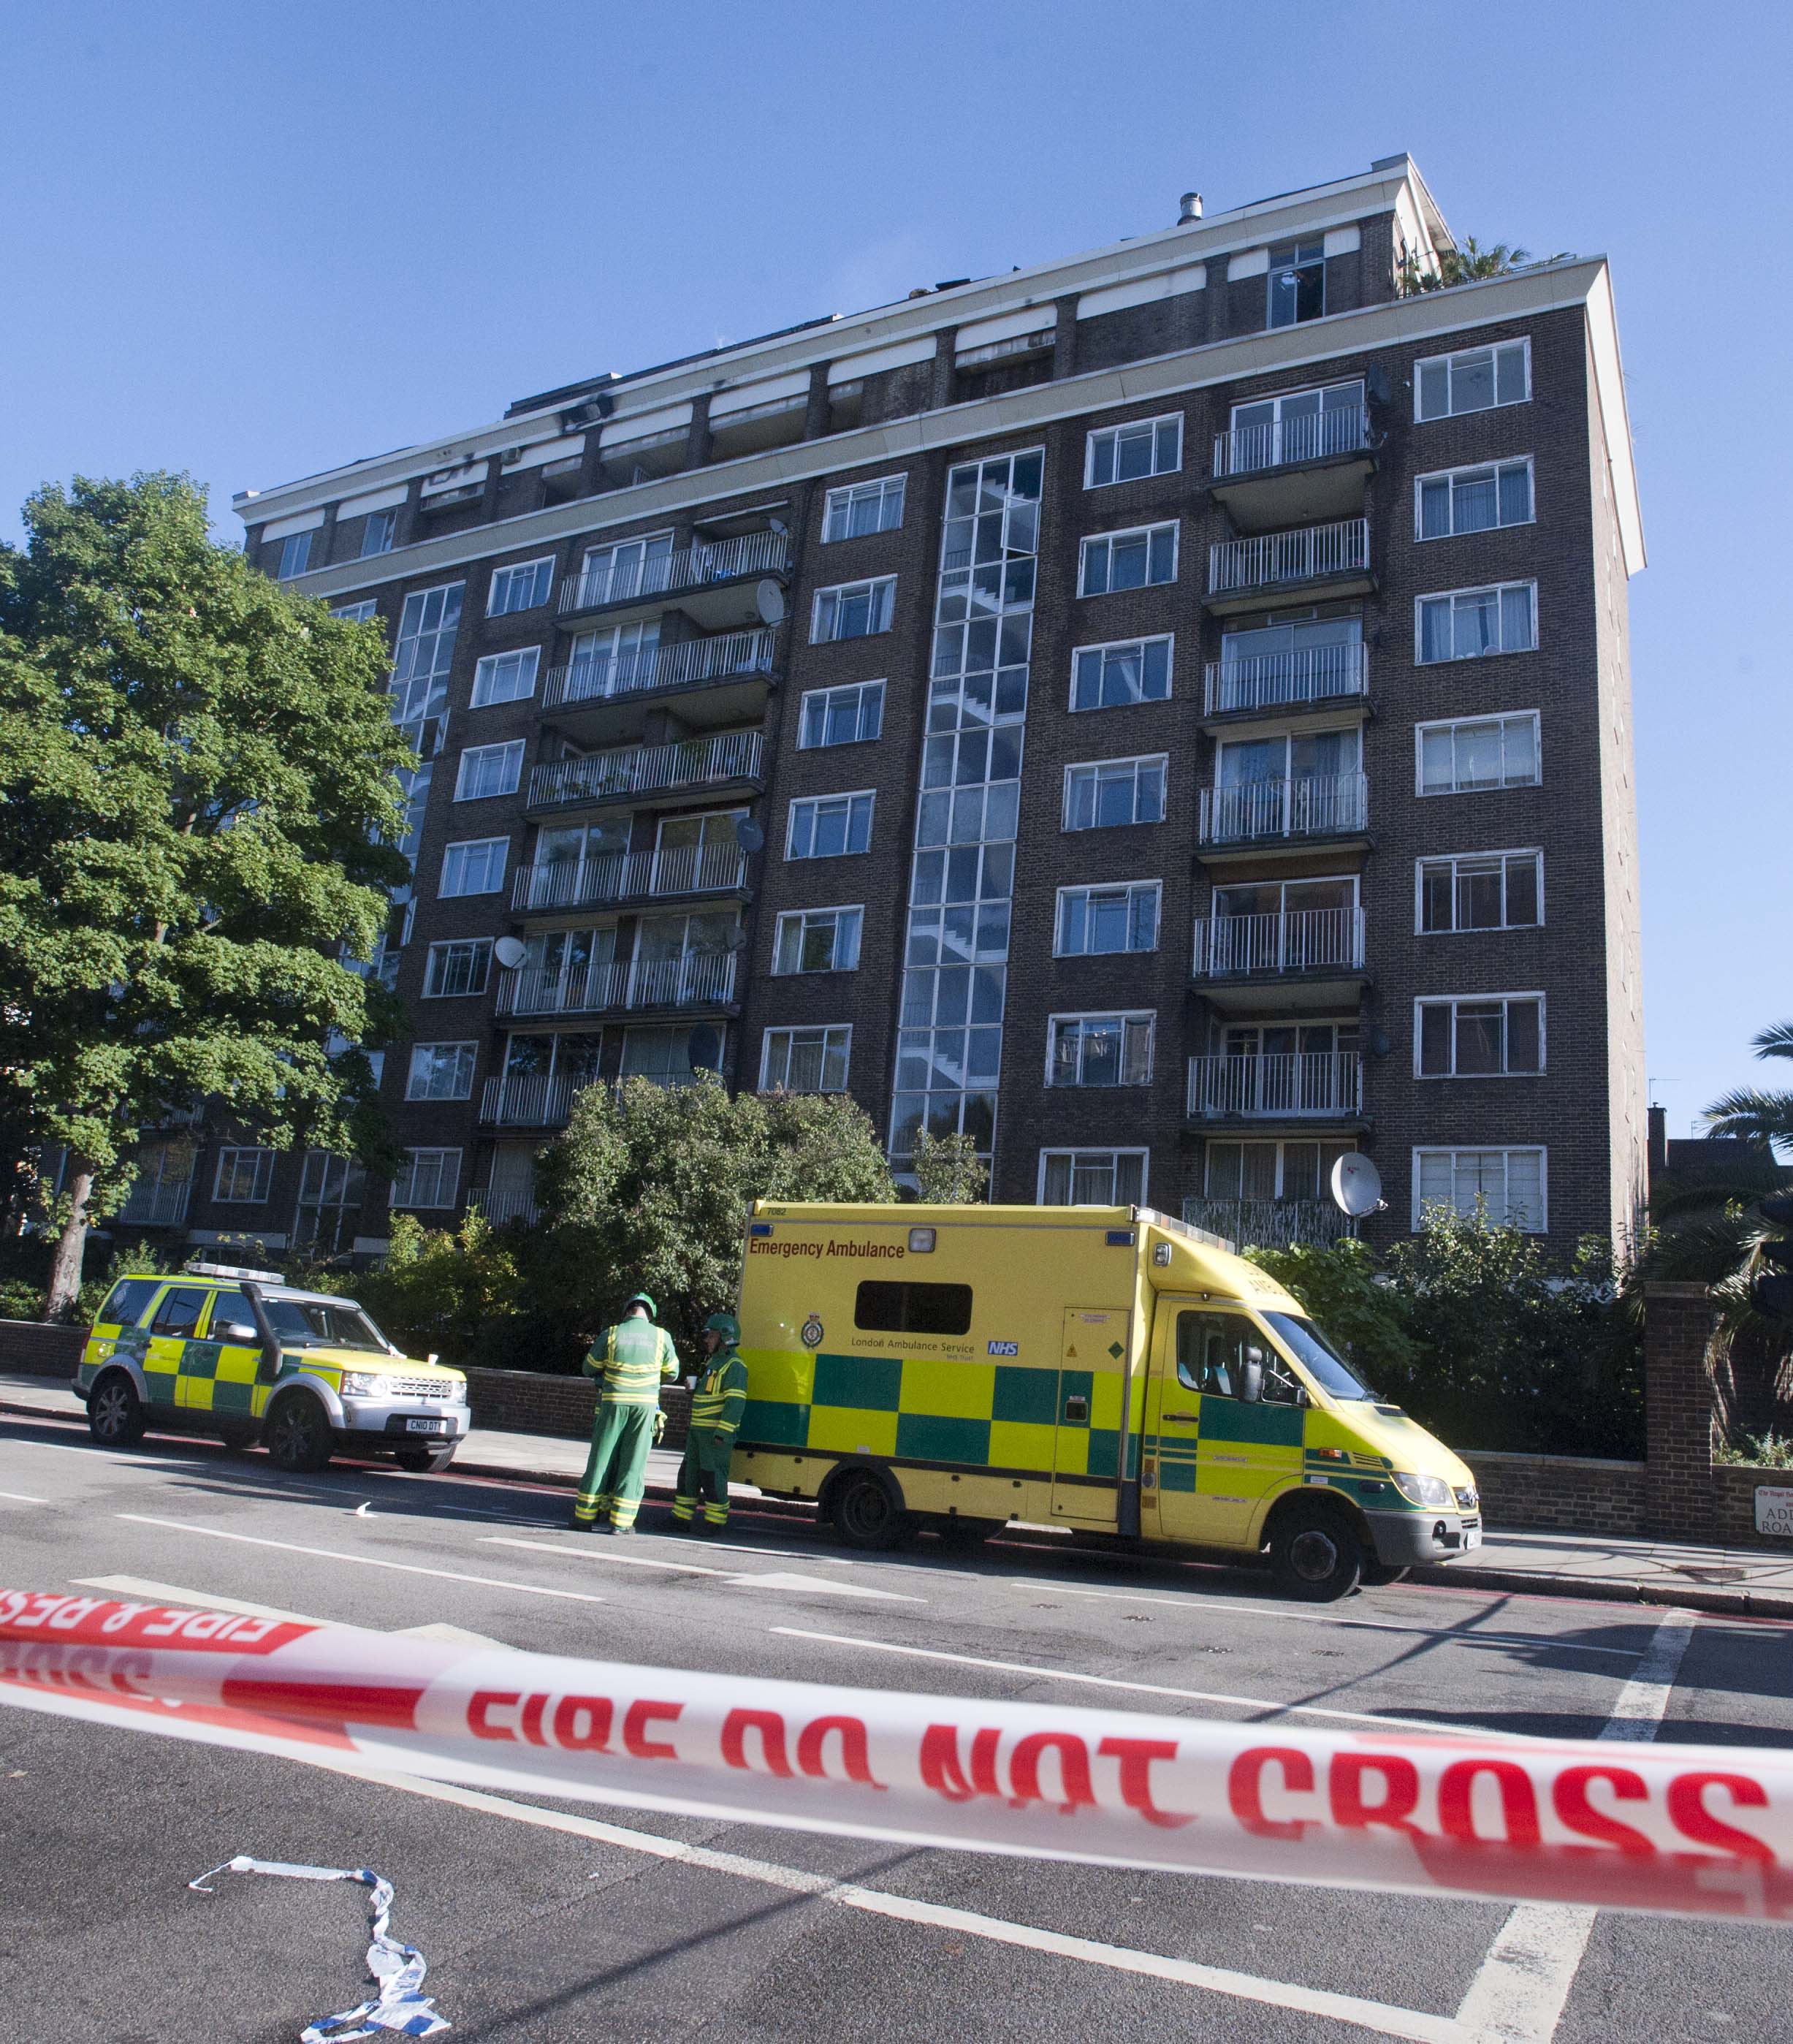 Duffy's £12m penthouse in Kensington caught fire in 2012